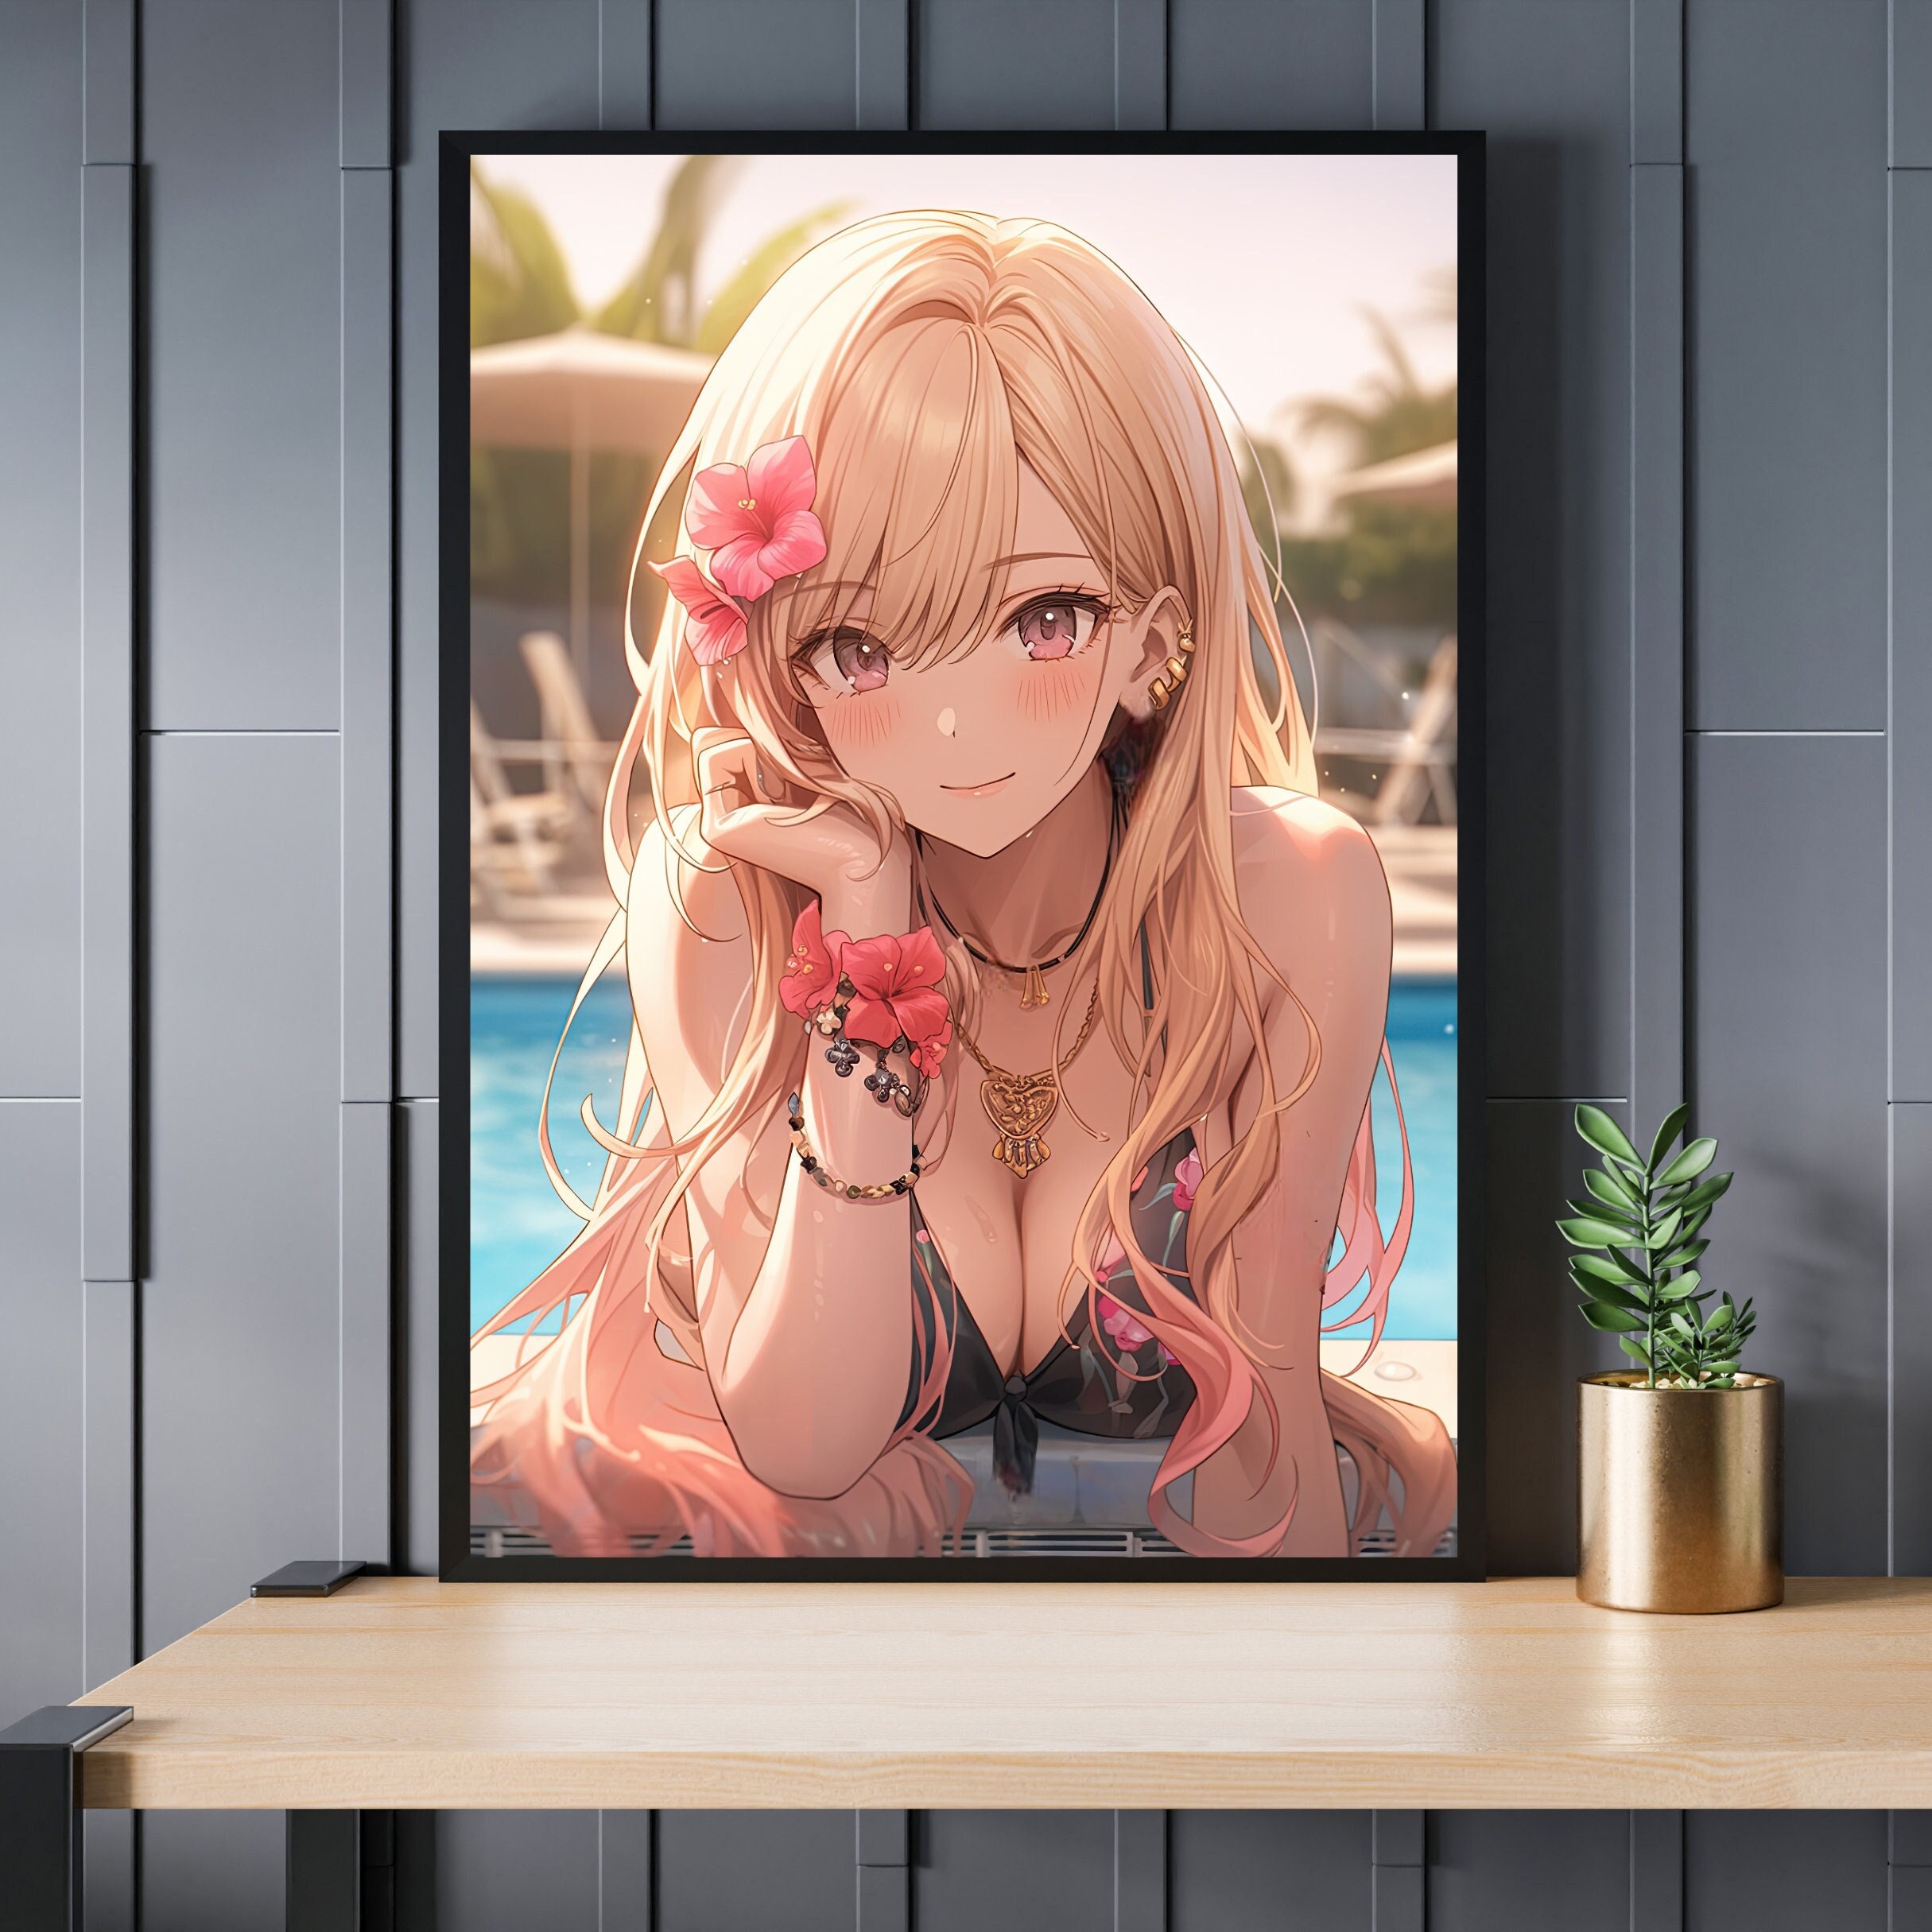 Cute anime Kitty girl, Anime gifts for girls, Astro Color Poster for  Sale by MaFleiva